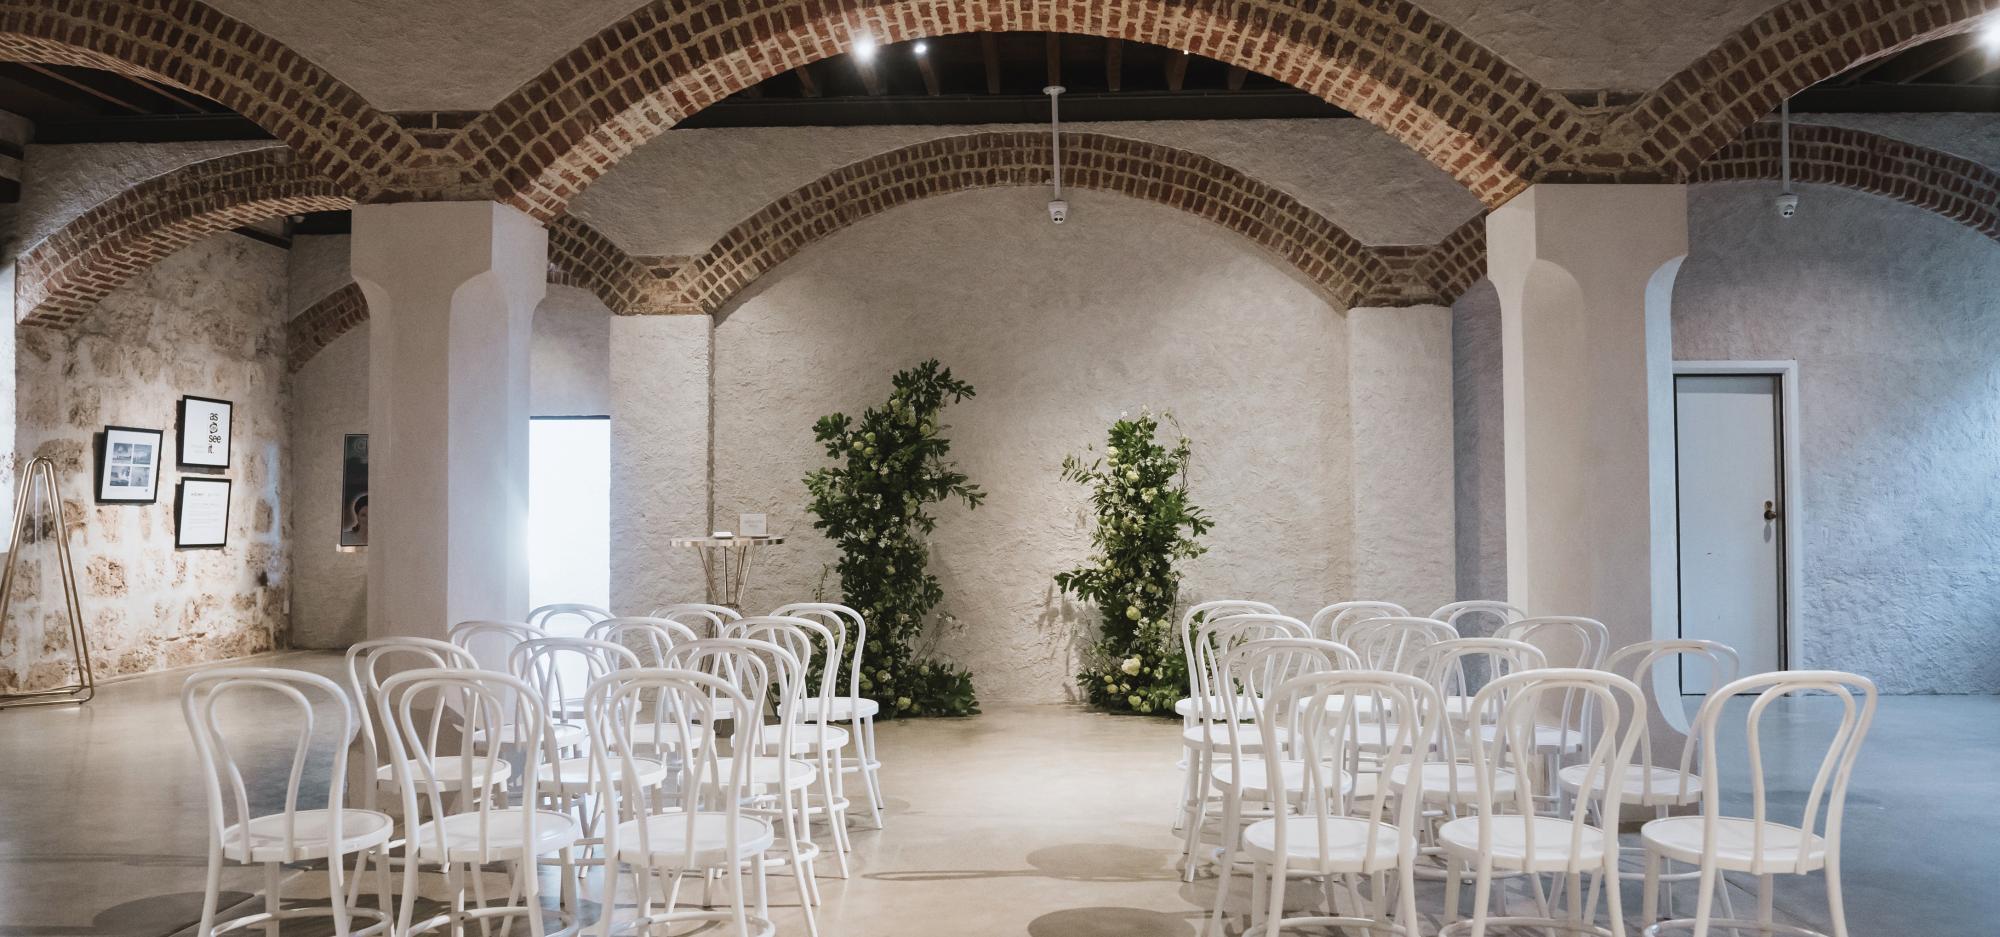 Chairs and flowers are arranged for a wedding in a large room with limestone walls and an arched ceiling 